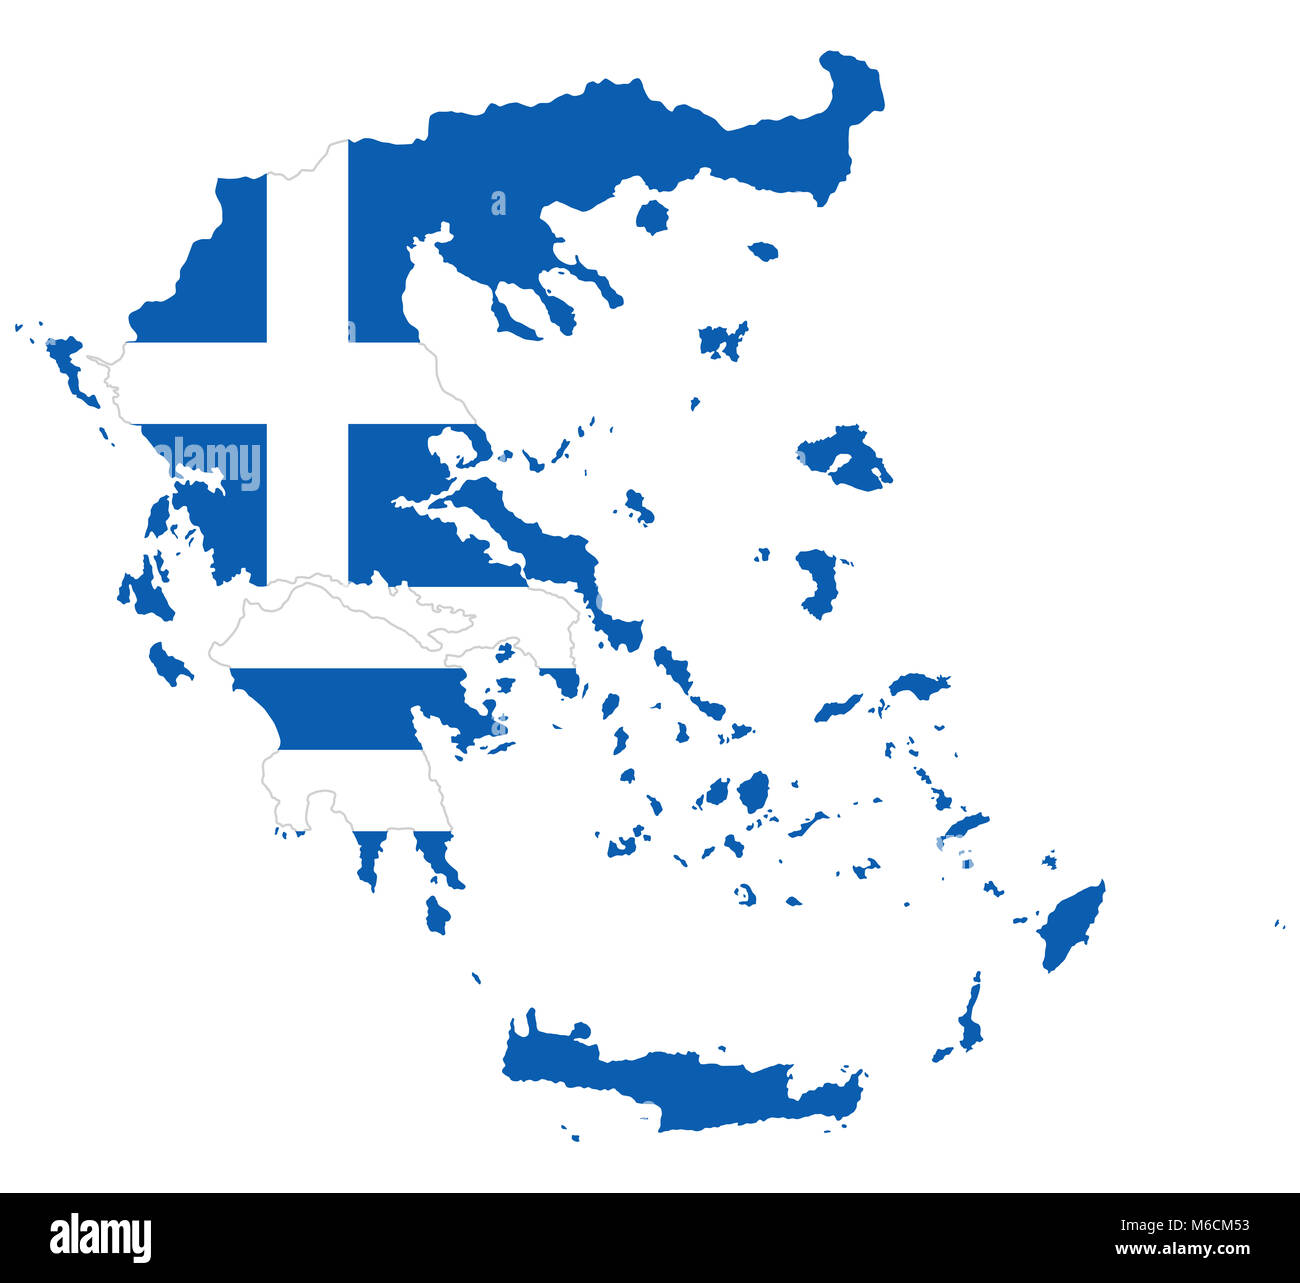 Flag in the outline of the Greece. Flag of the Hellenic Republic in blue and white colors with white cross. Banner with the shape of Hellas. Isolated. Stock Photo